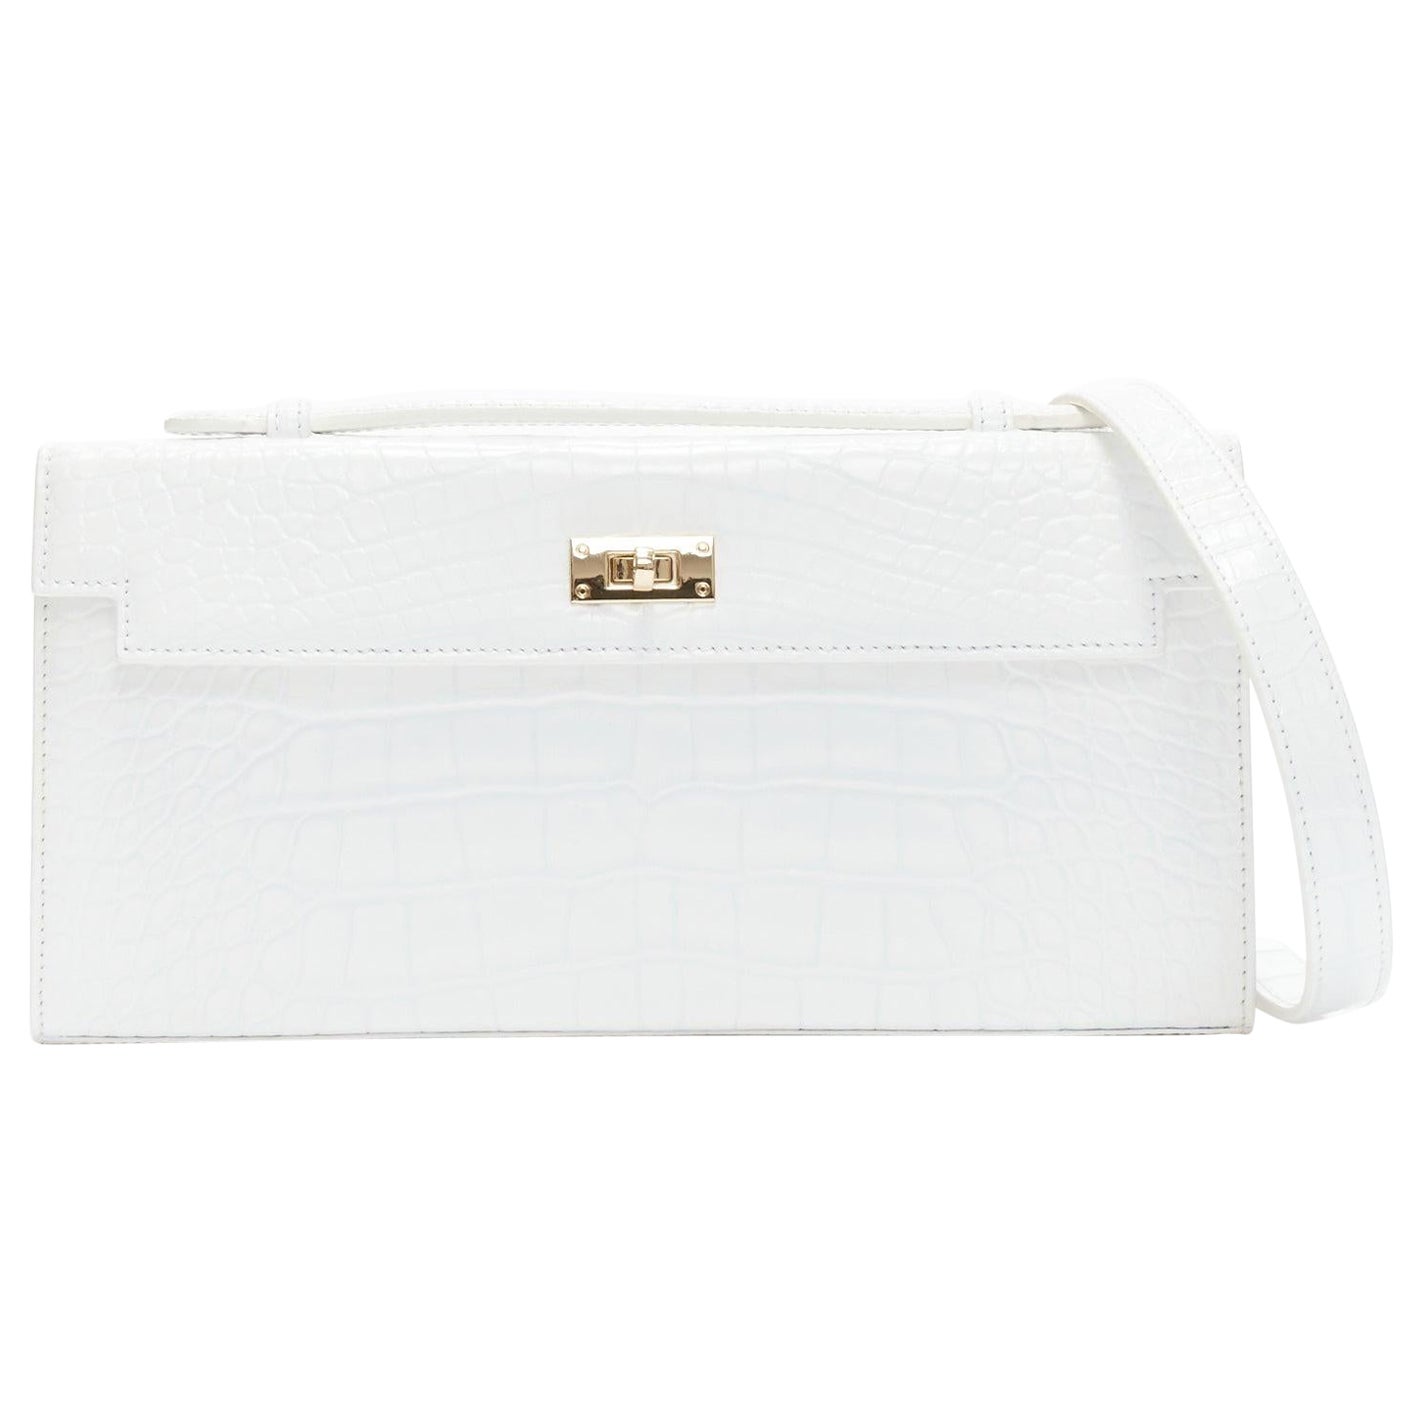 FERIDA YANG Bespoke white matte scaled leather gold buckle long flap clutch For Sale